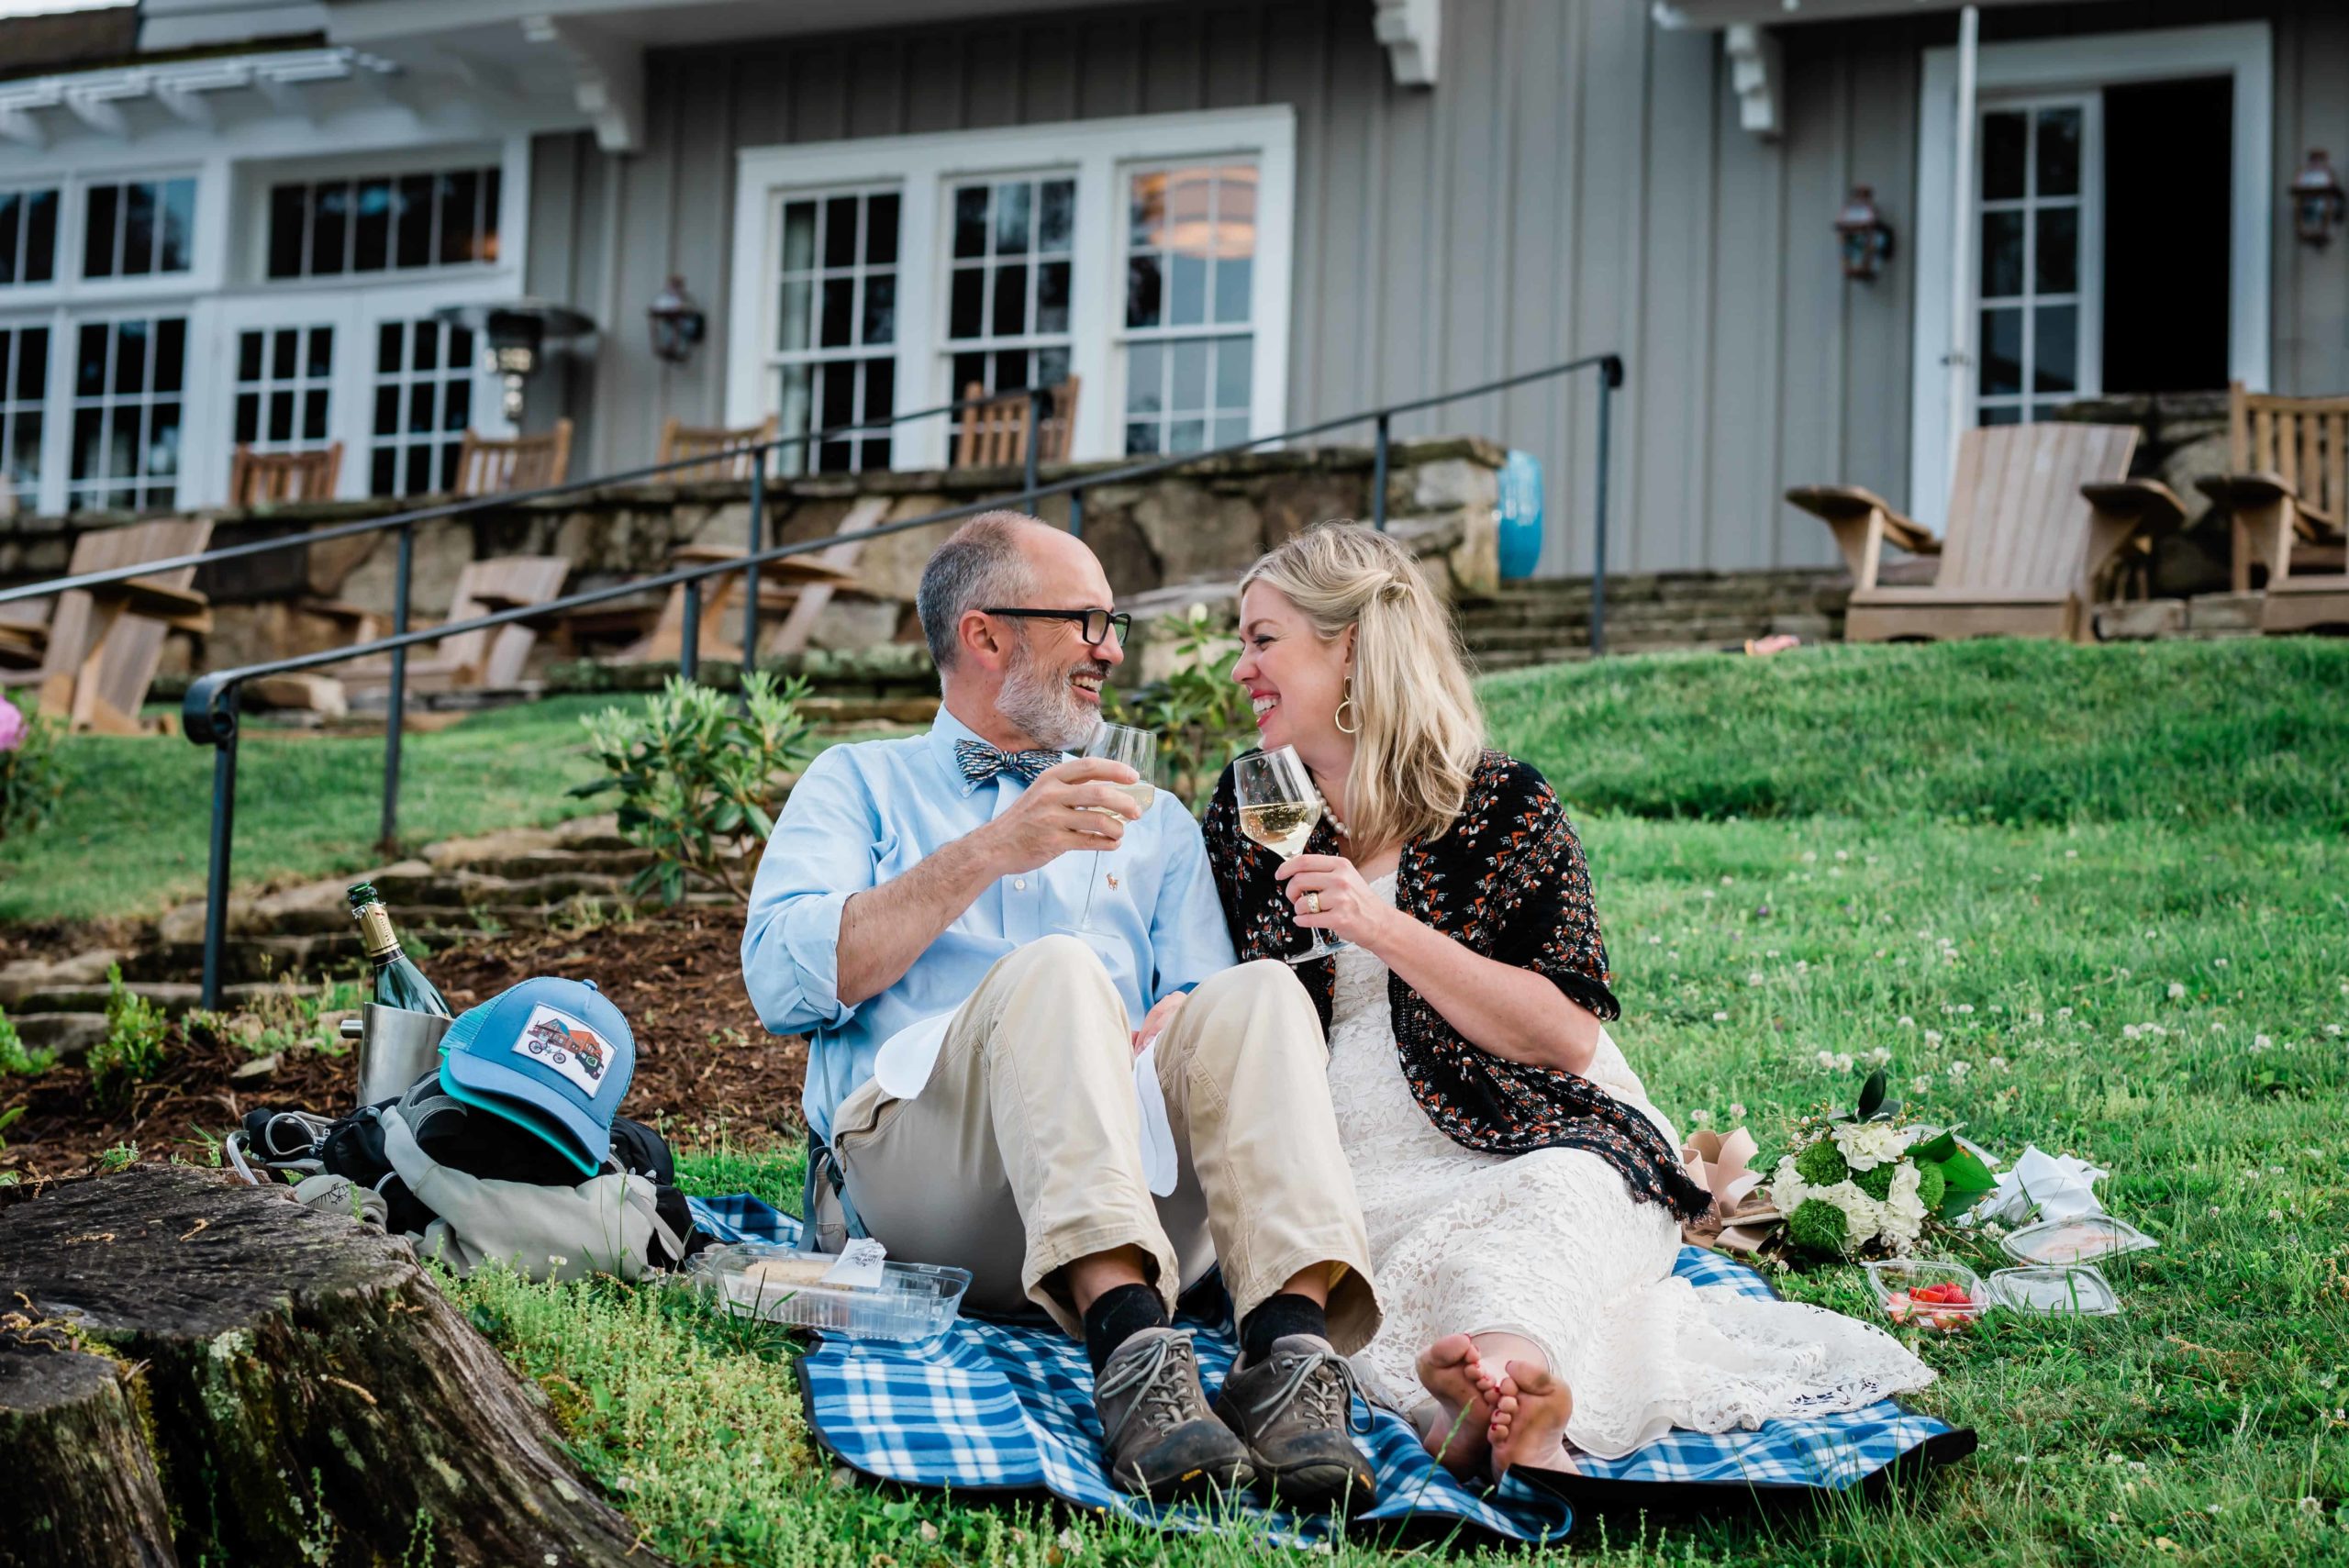 Couple sits on a picnic blanket in front yard, smiling at each other and holding wine glasses.